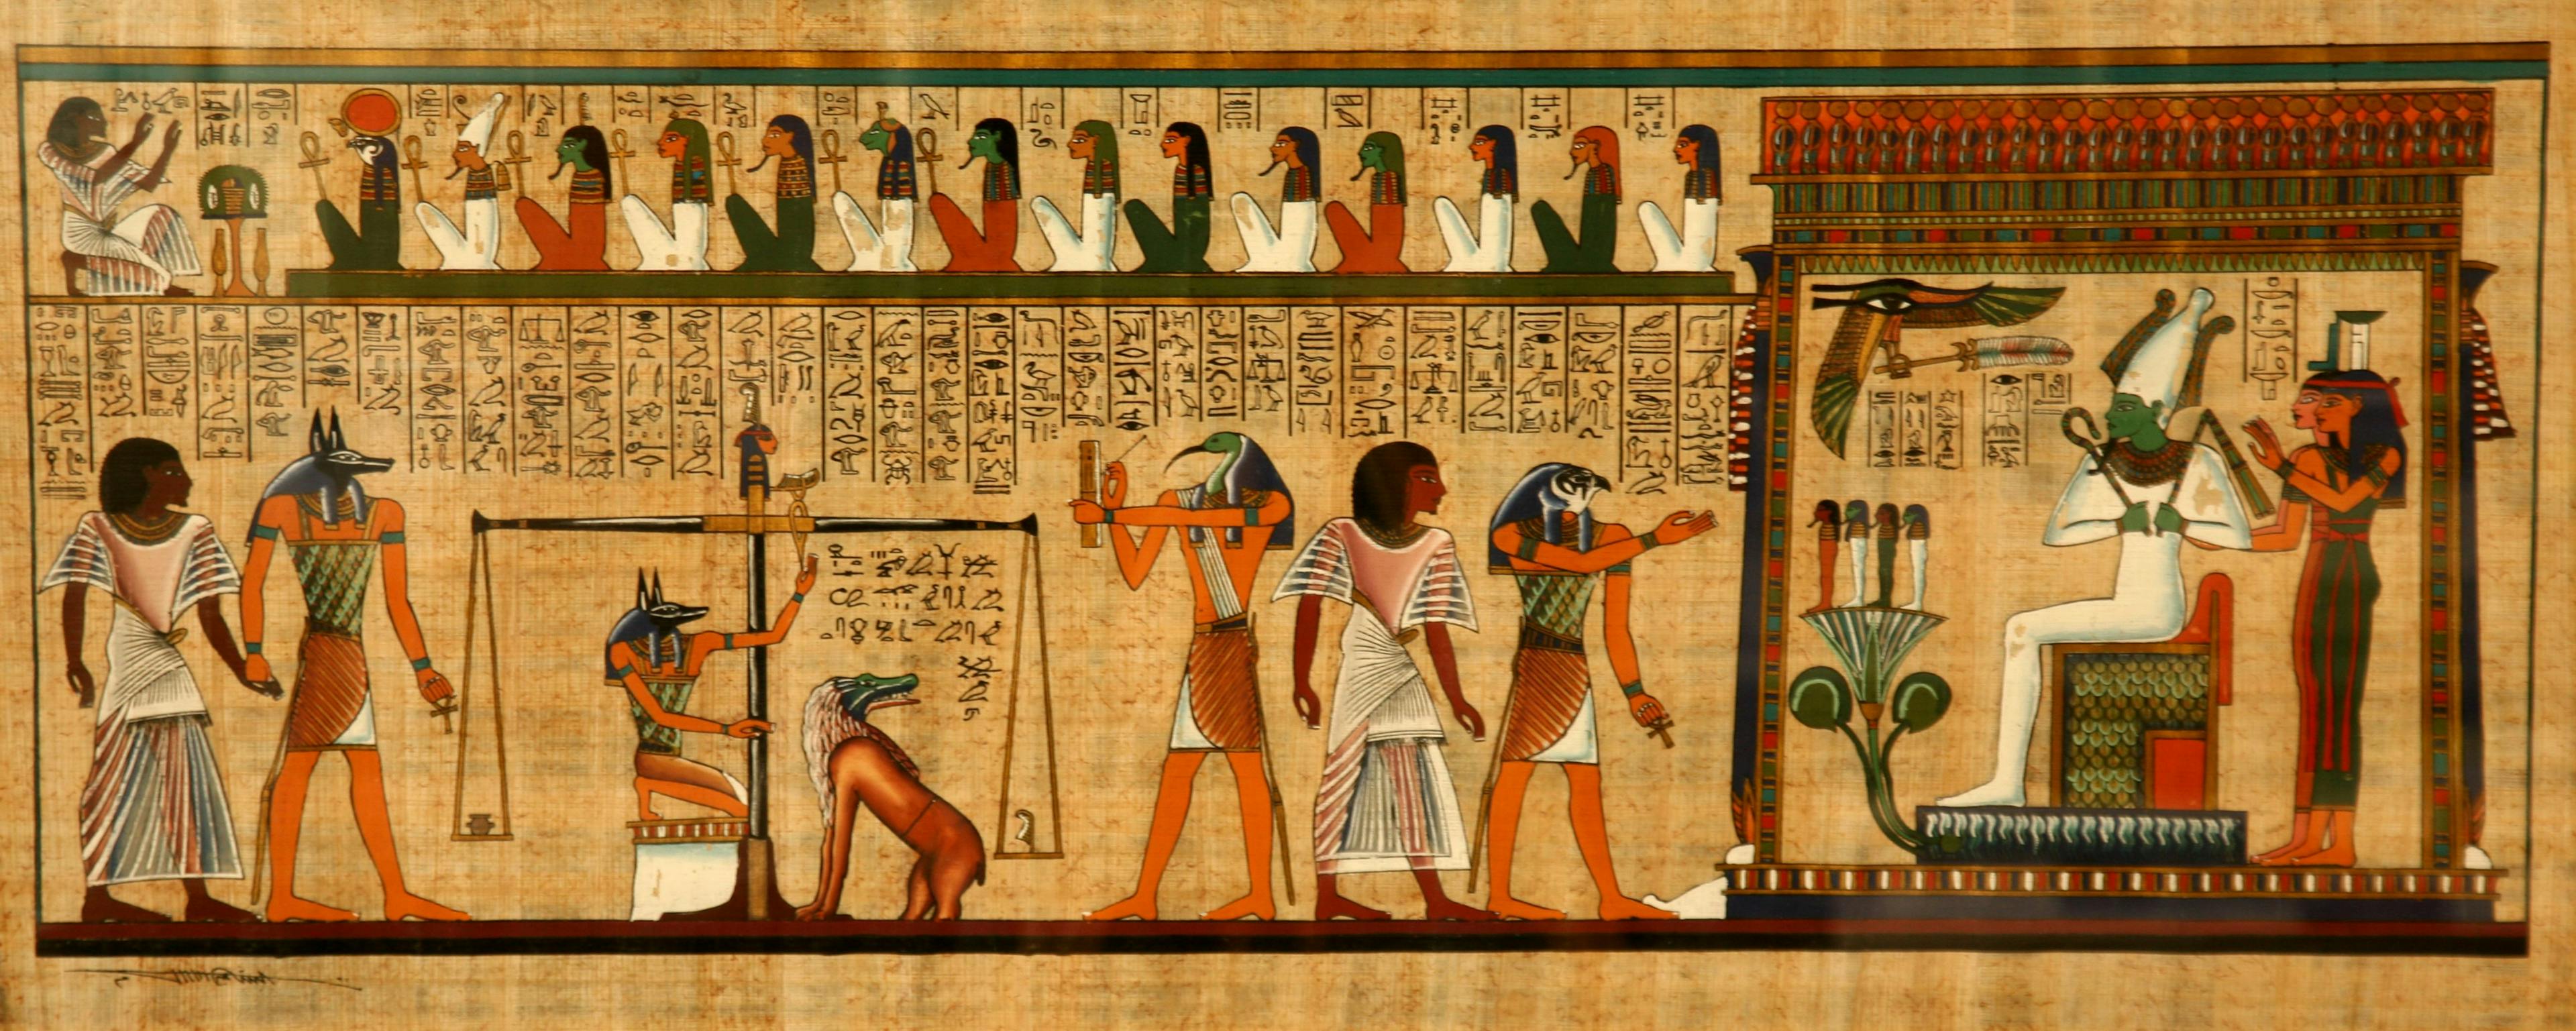 papyrus of the dead ancient egypt | Image Credit: © francescodemarco - stock.adobe.com